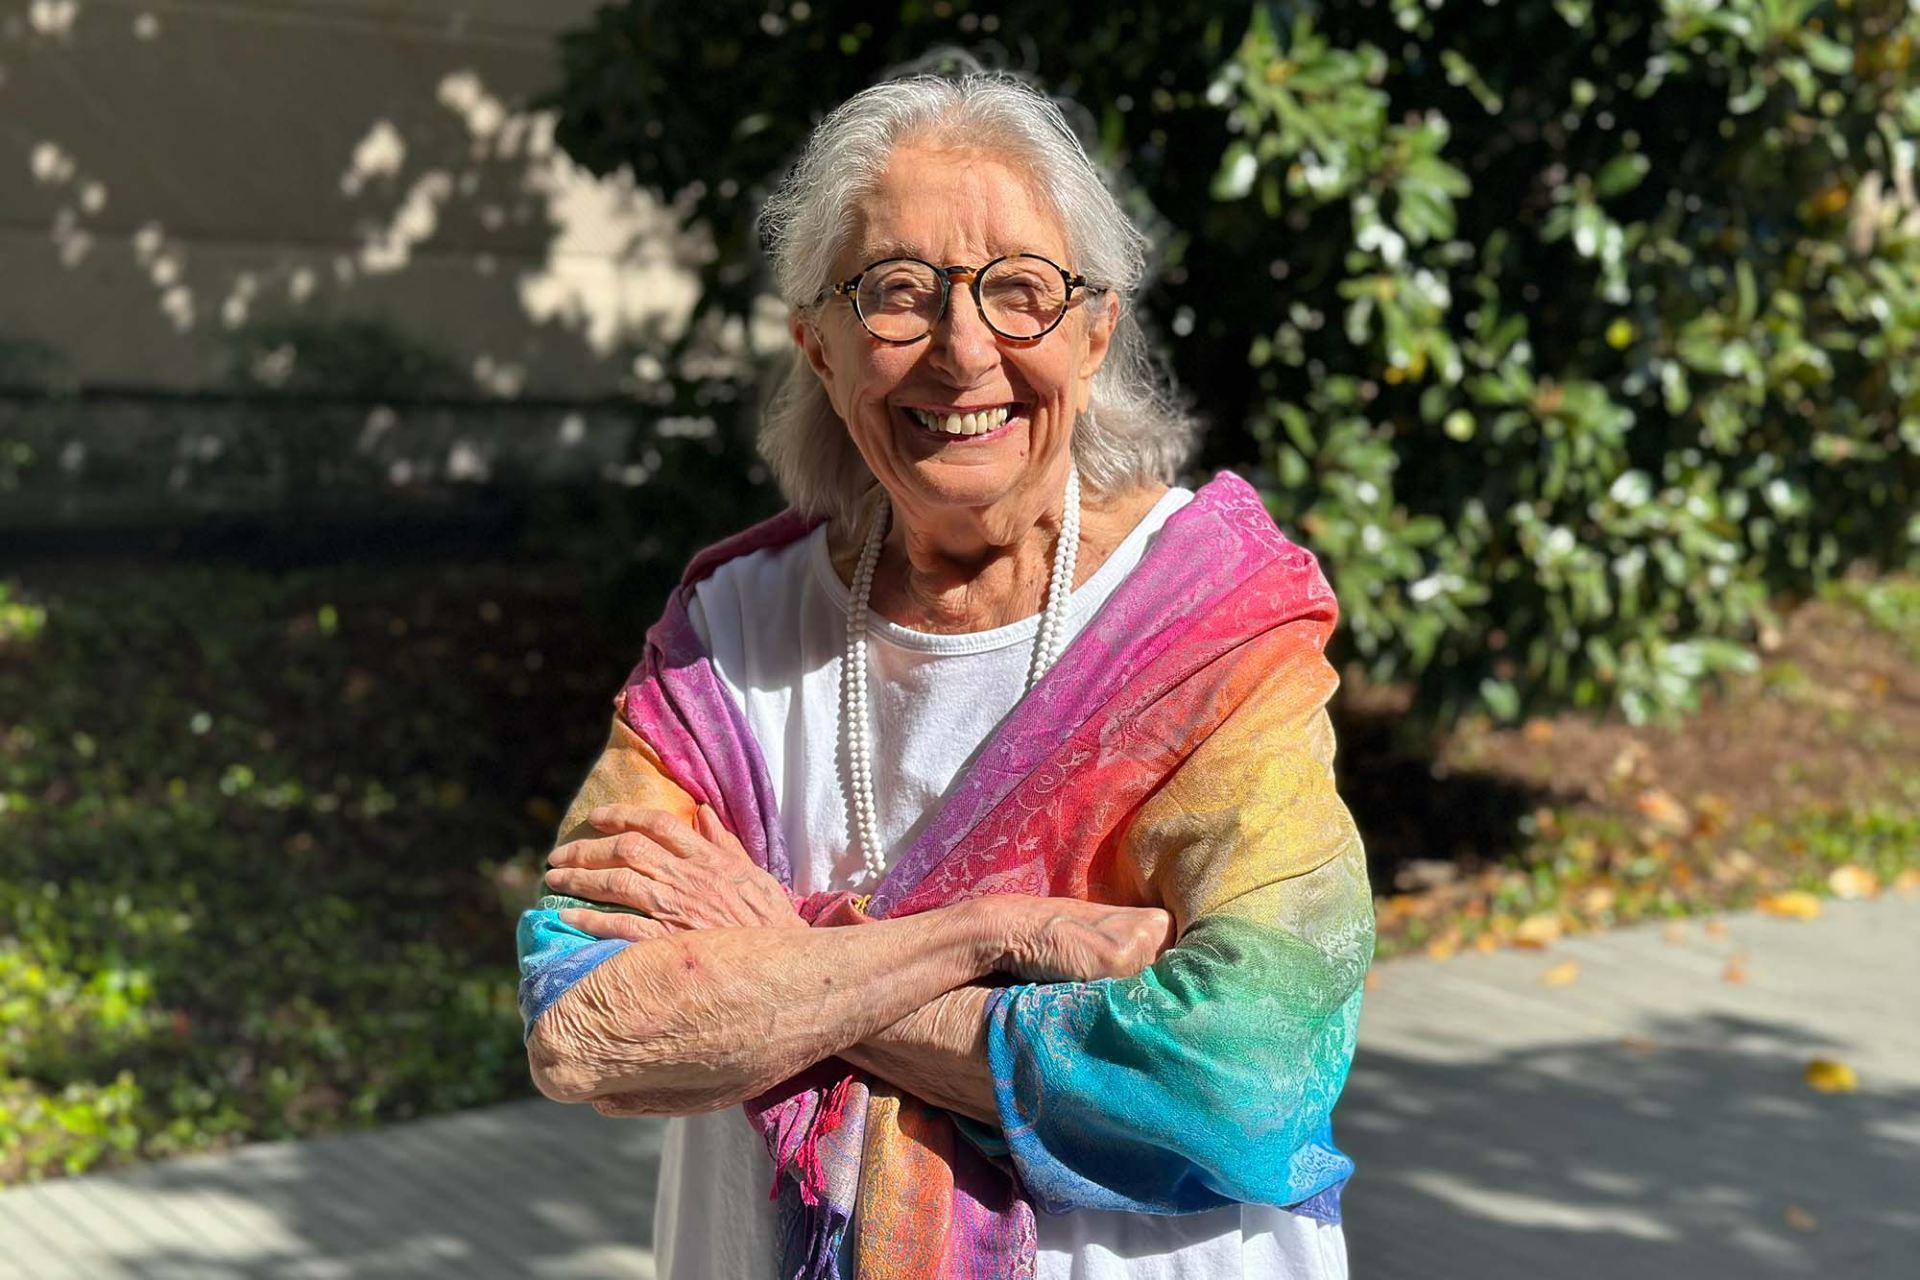 Joan Bernstein BA’08, MA’10 will become the oldest student to receive a PhD from UT Dallas at the age of 88. She has been taking classes at UTD for more than 20 years.